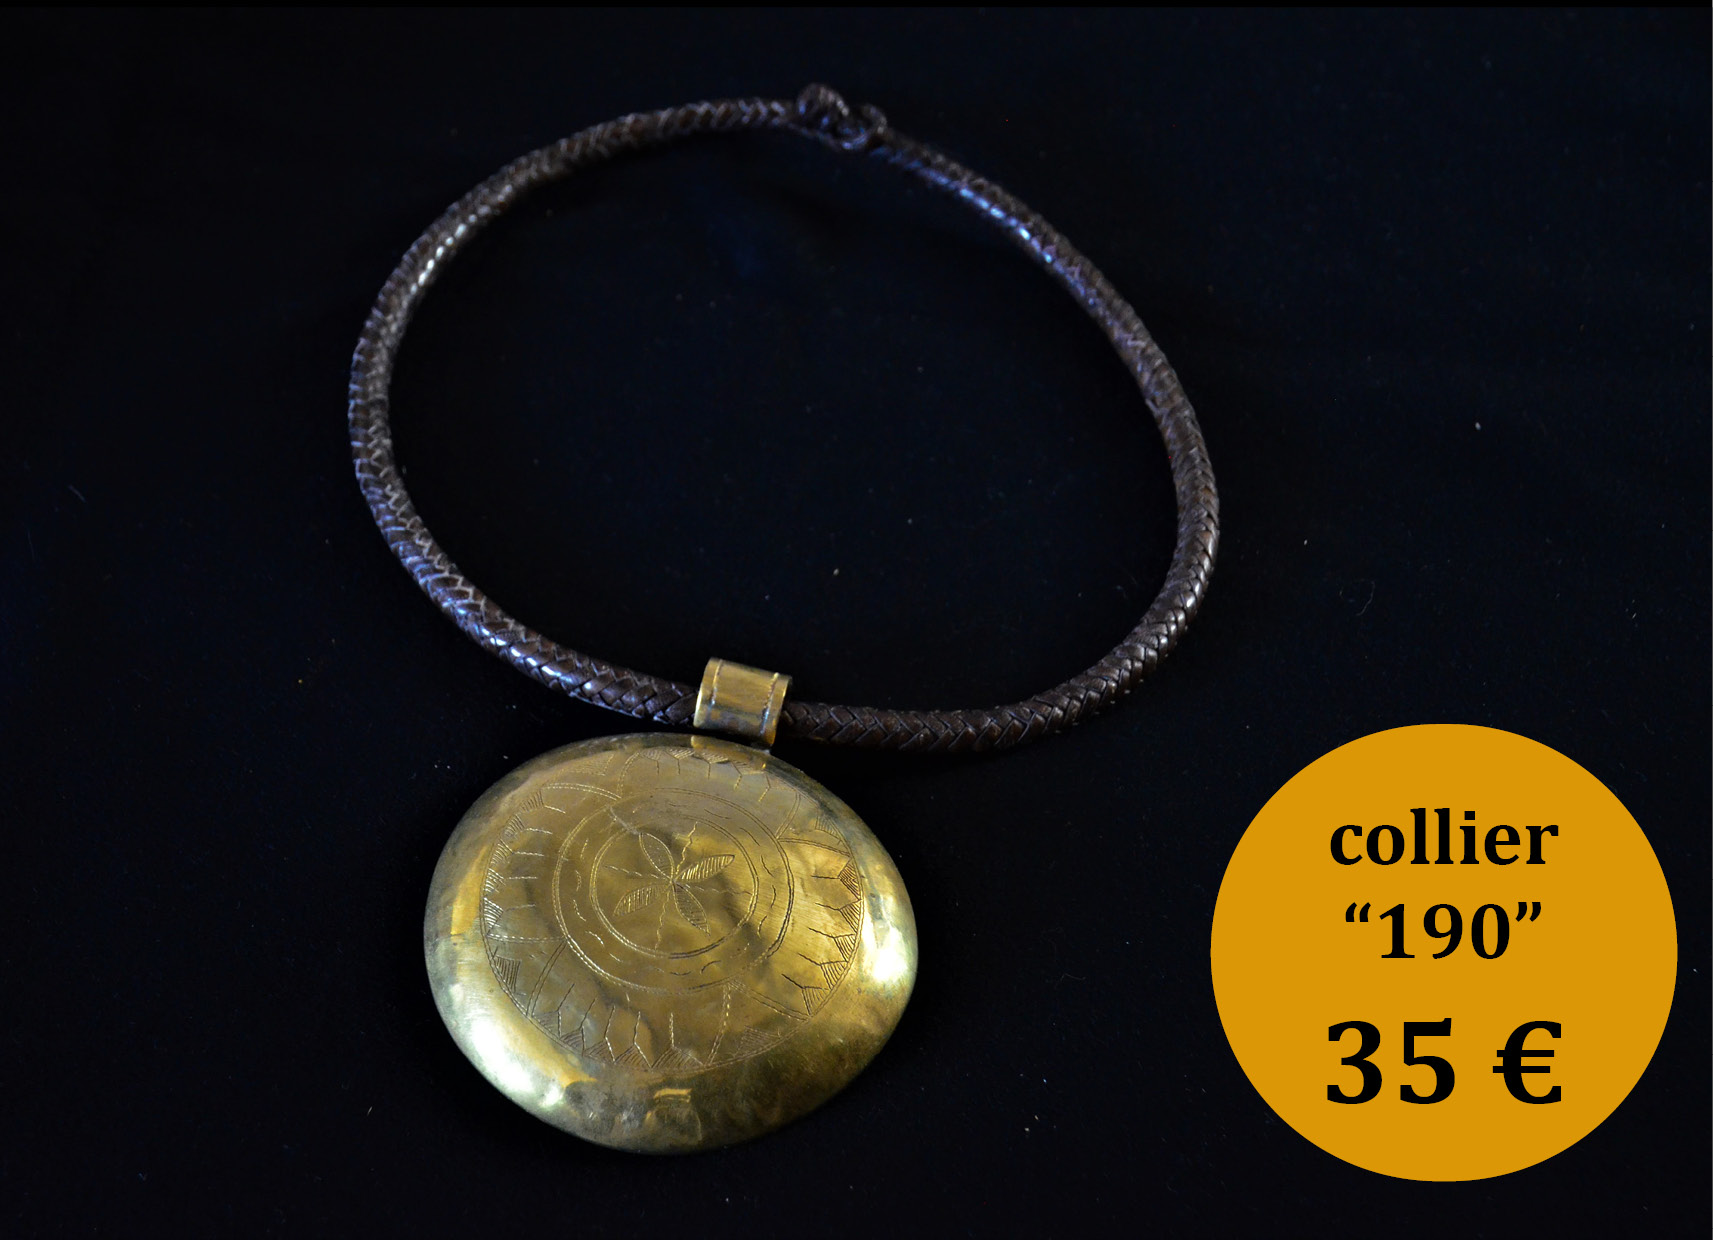 Collier "190"